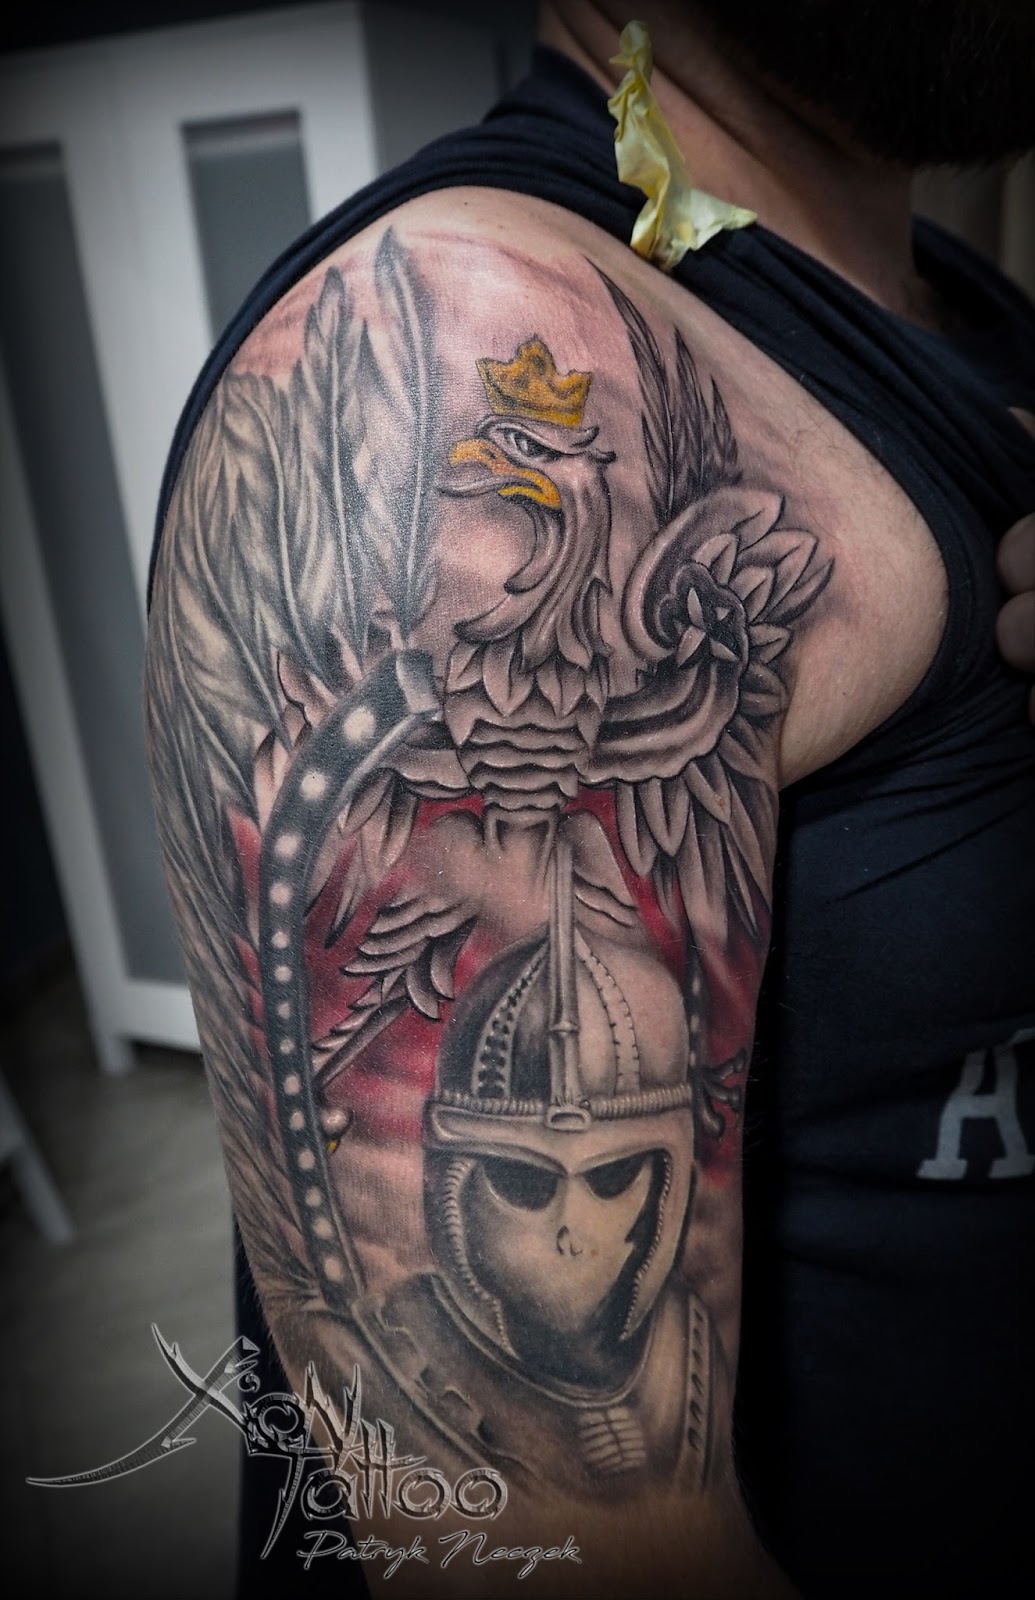 Press HD Polish Hussar done by Dominik Hussar has been done 2 weeks ago  and was fully healed and We added Hussar wings recently Check details   By Seven Deadly SinsArt Worksop 